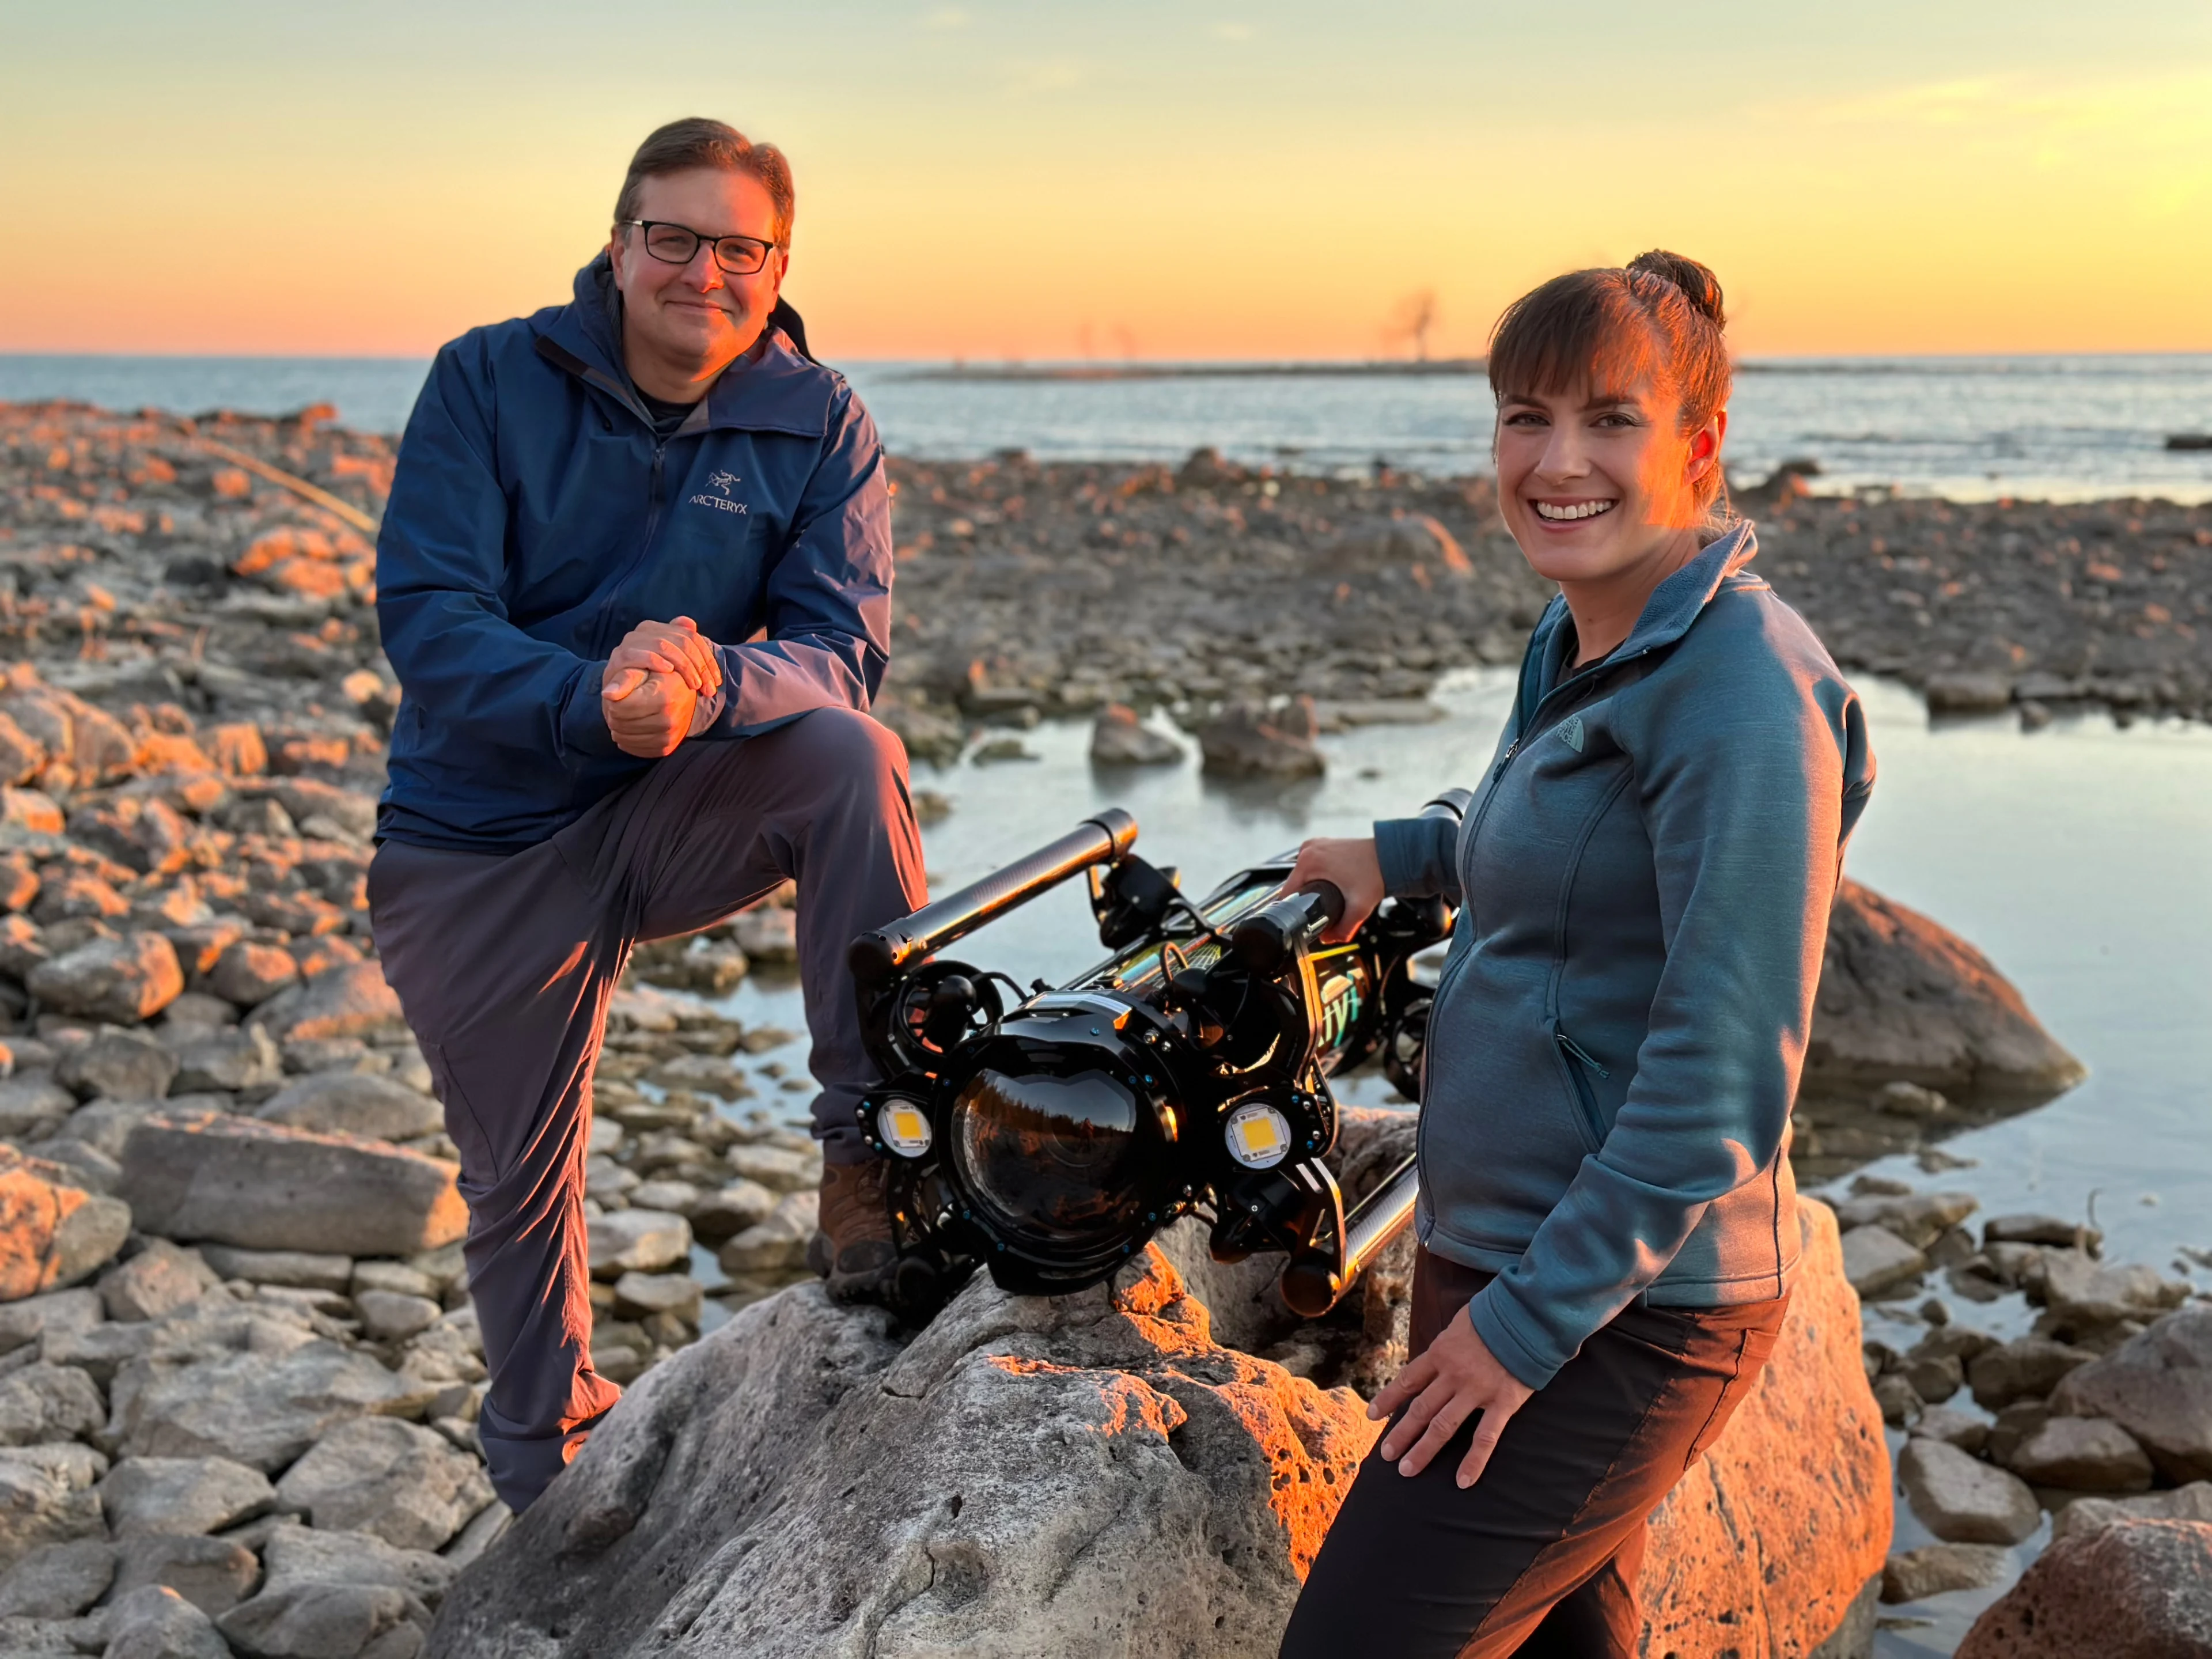 Filmmakers Zach Melnick and Yvonne Drebert made discovery of Africa shipwreck in Lake Huron (Submitted)